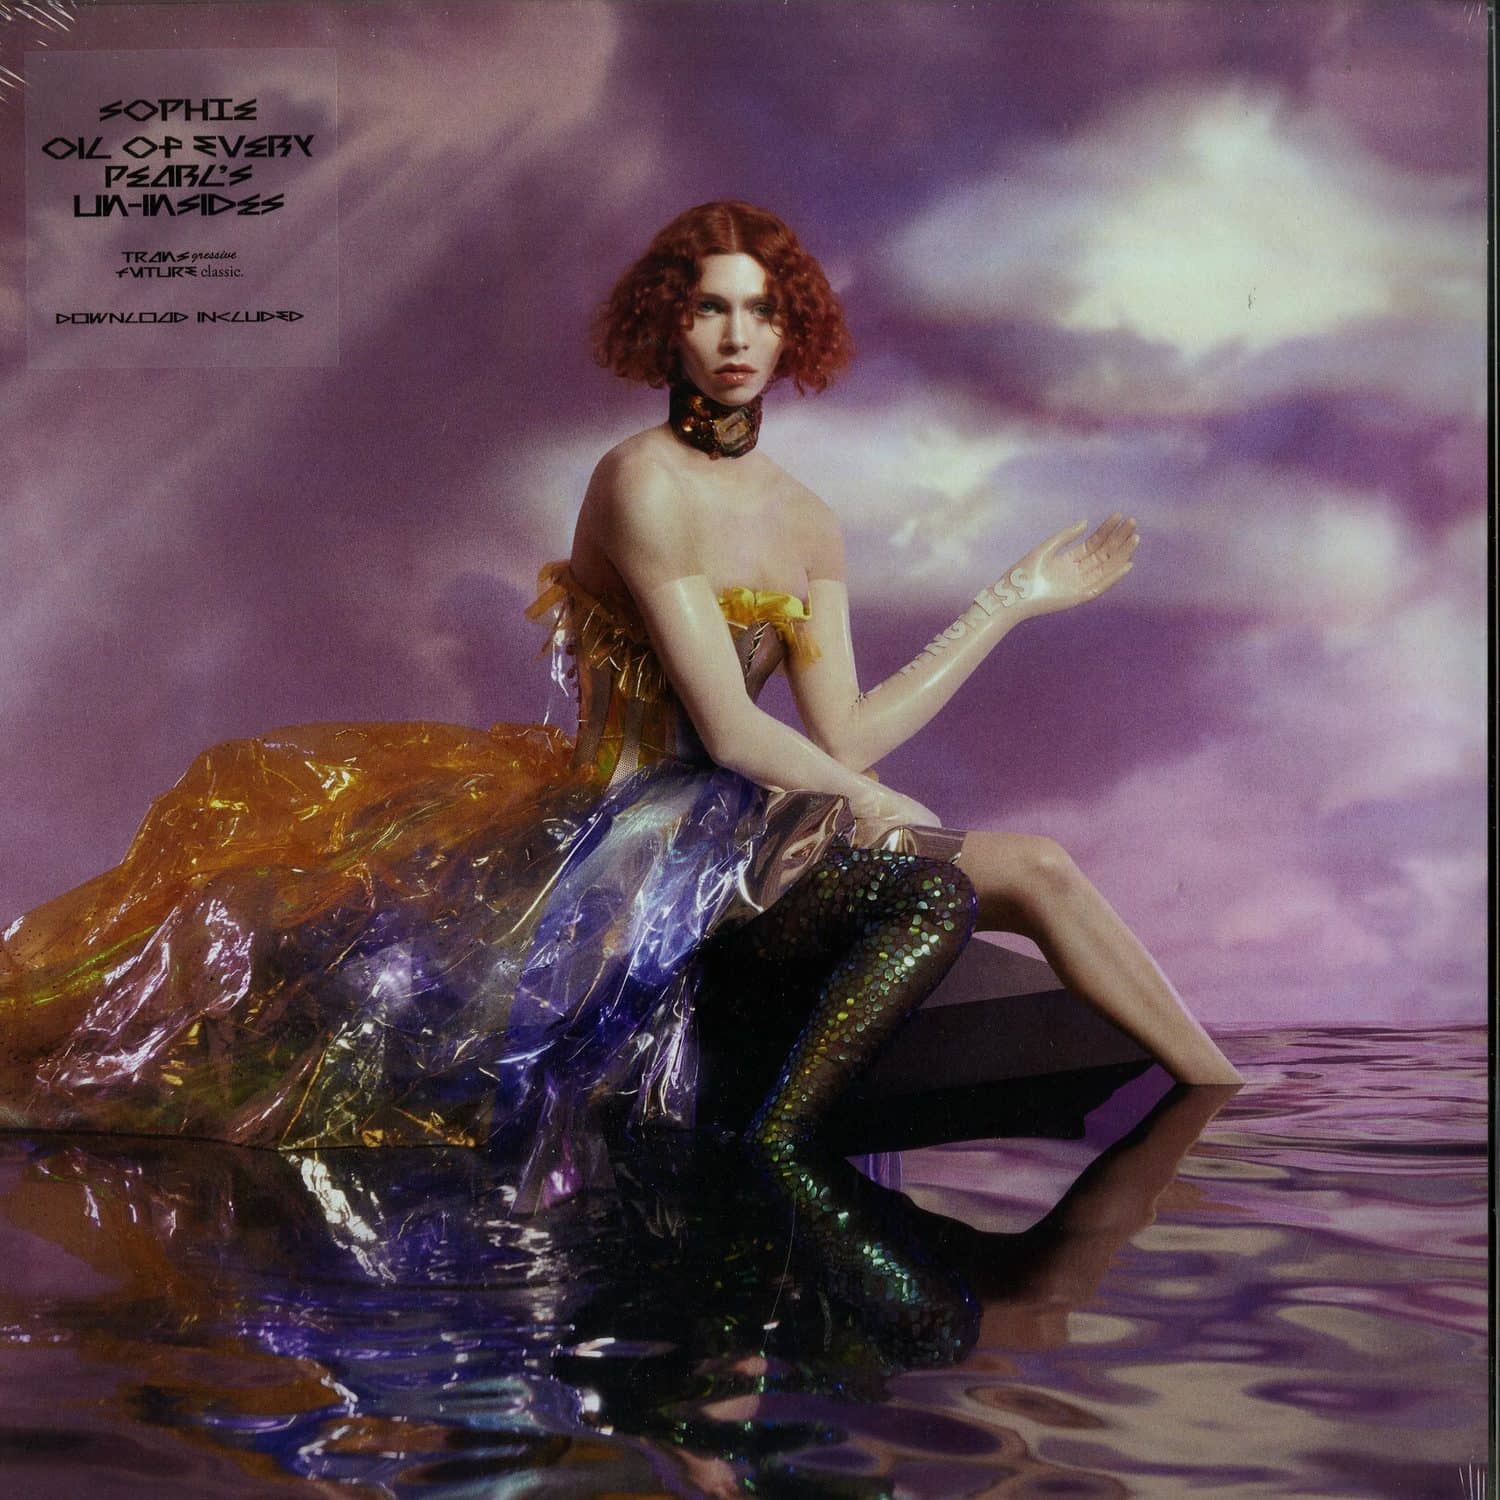 Sophie - OIL OF EVERY PEARLS UN-INSIDES 